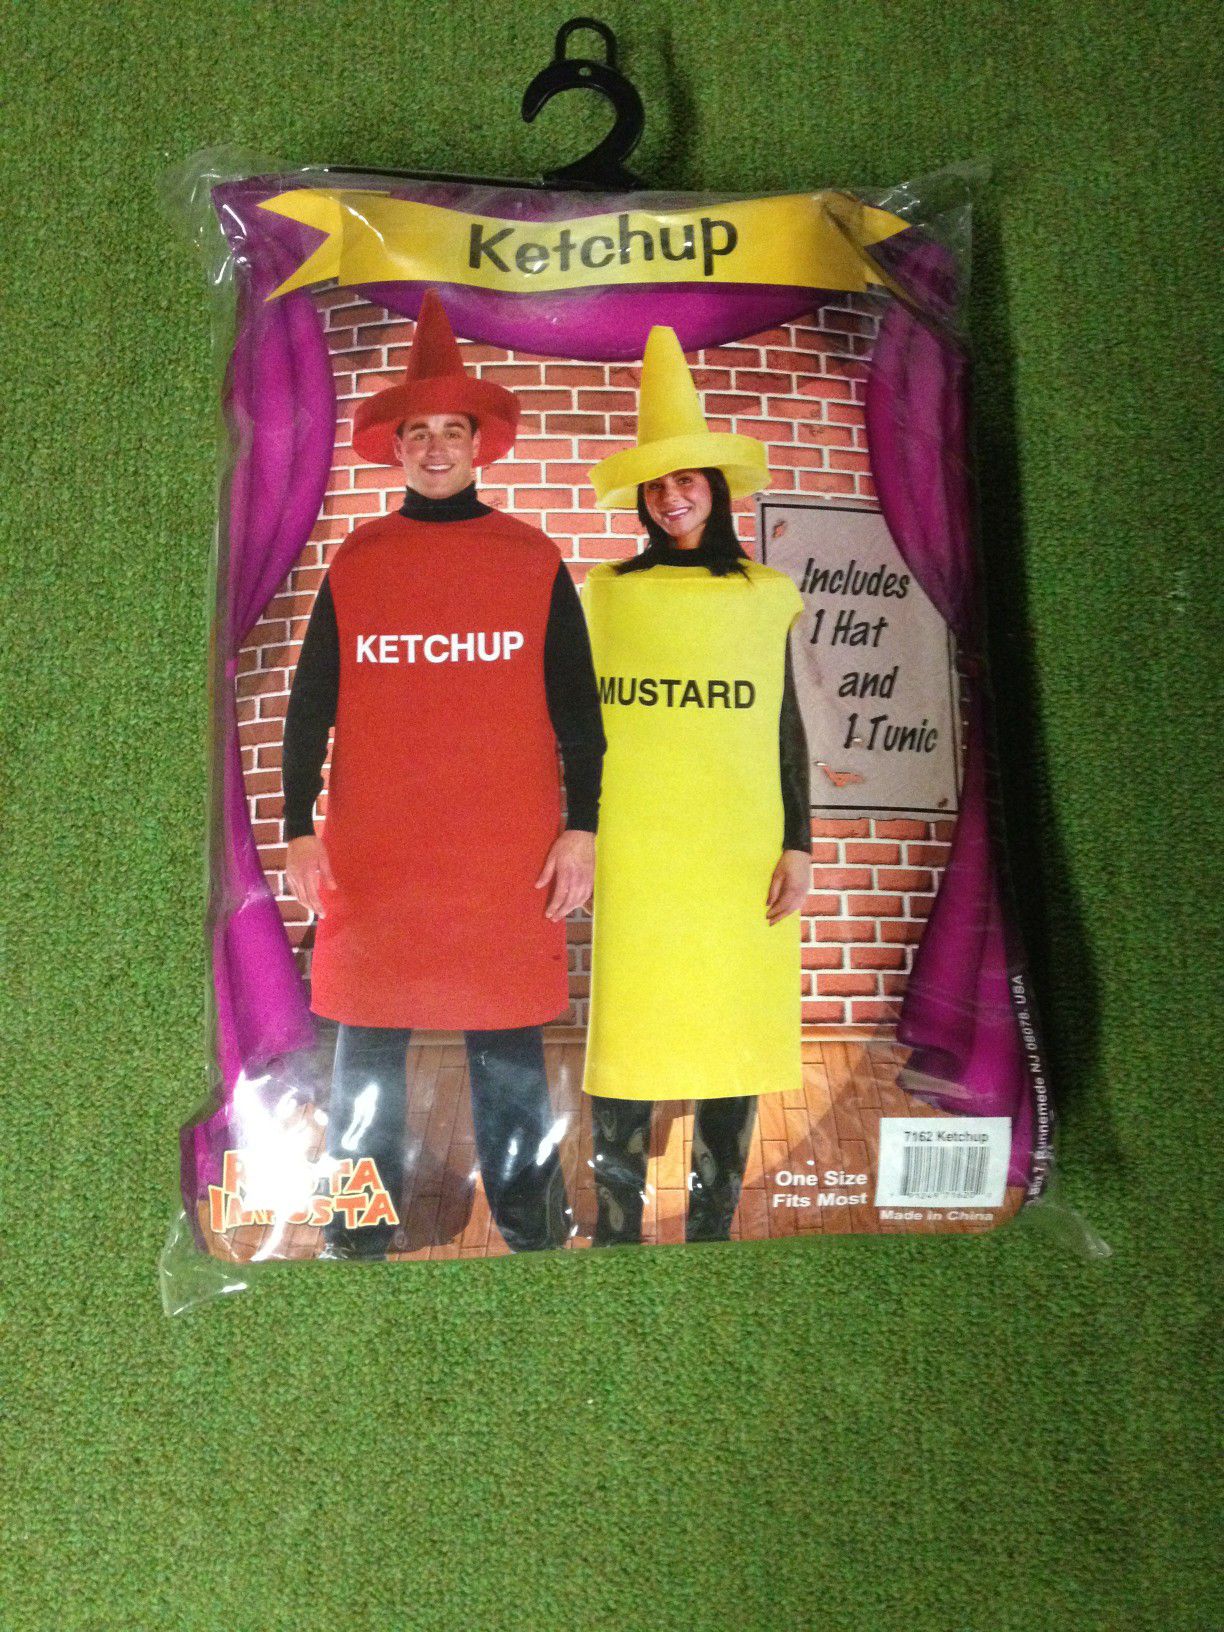 Who wants to be Ketchup?! You do!